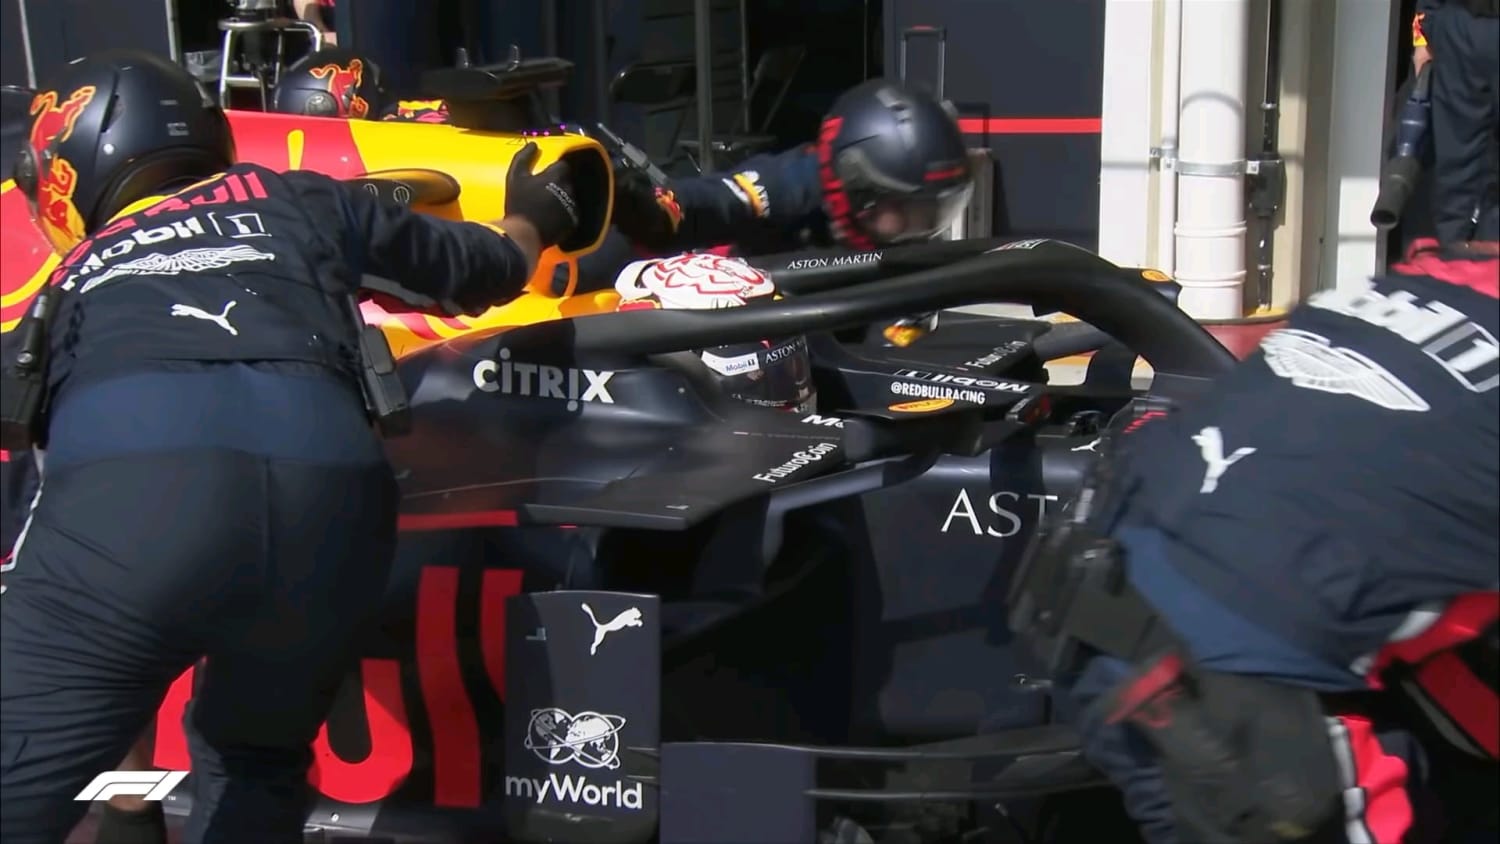 The fastest pit stop in Formula 1 history, performed by Red Bull in 1.82 seconds.